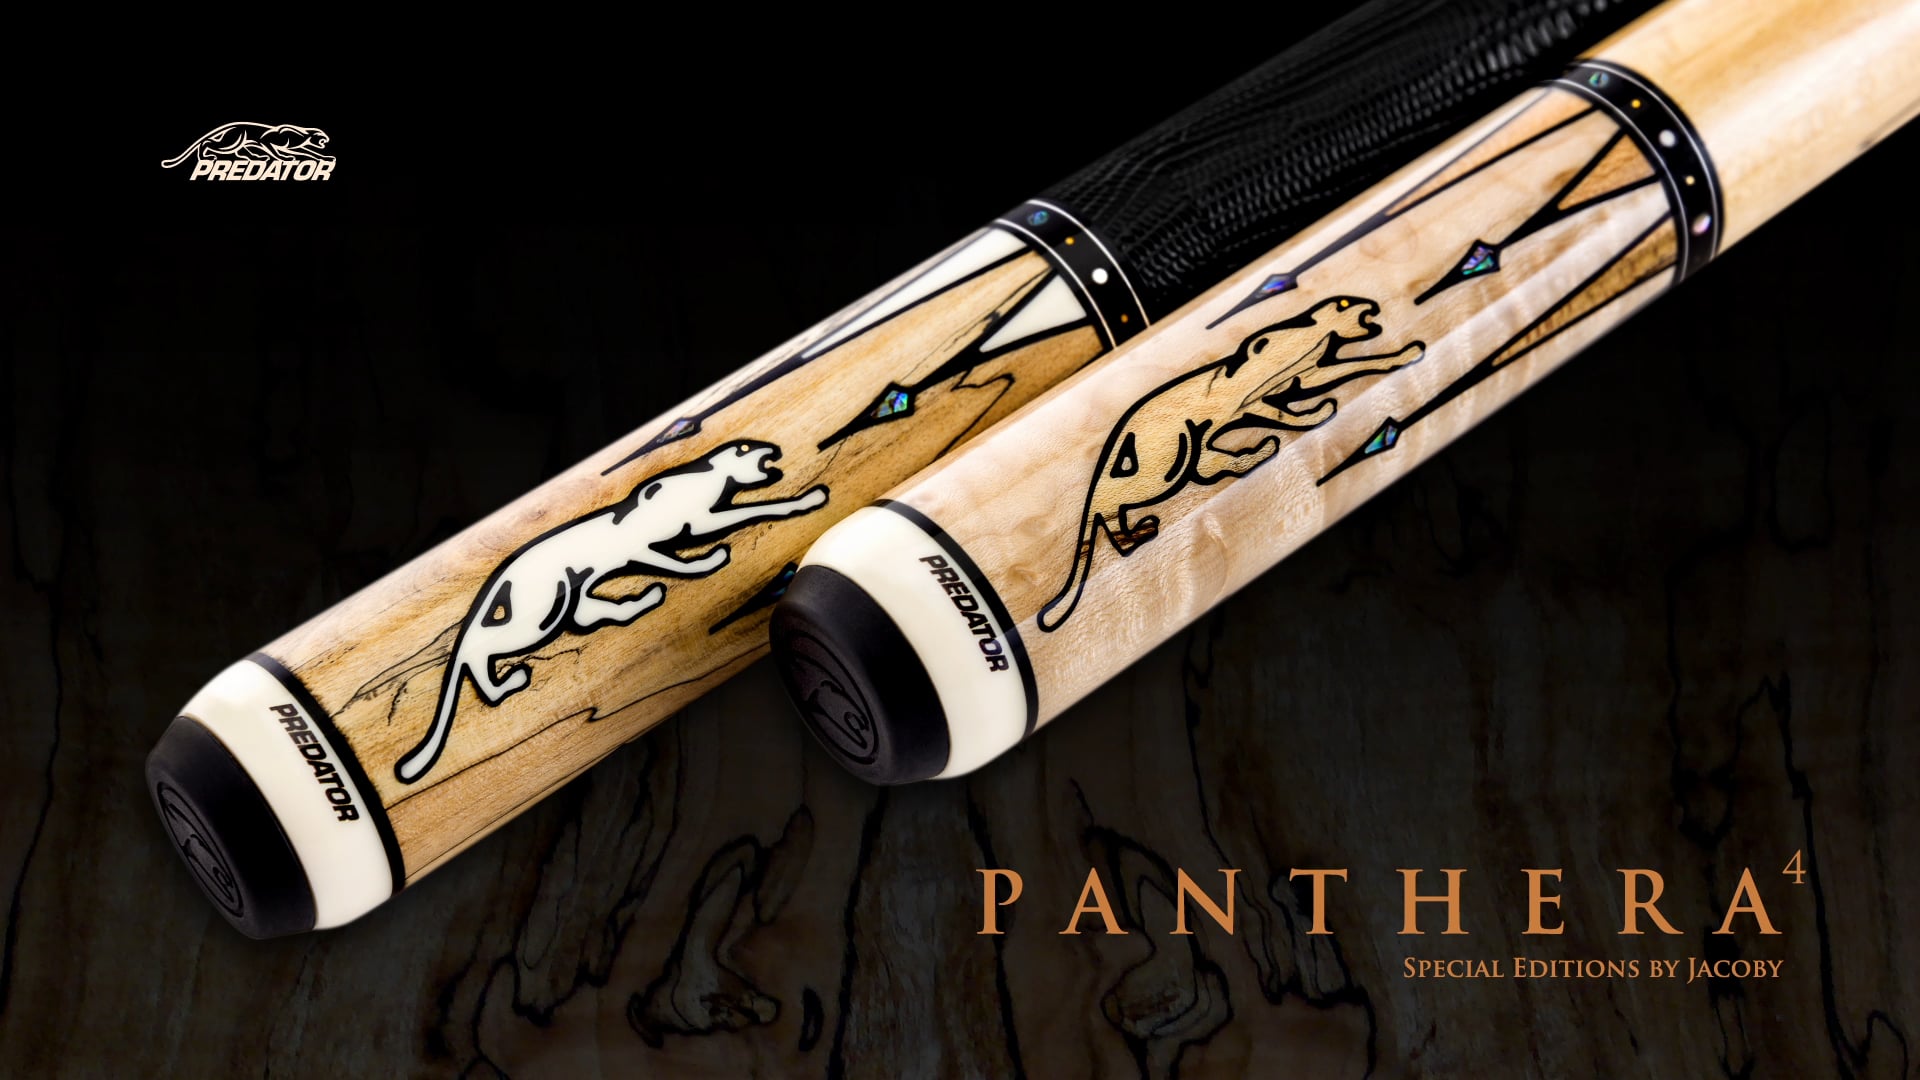 Predator Cues Panthera4 Special Edition Cues by Jacoby